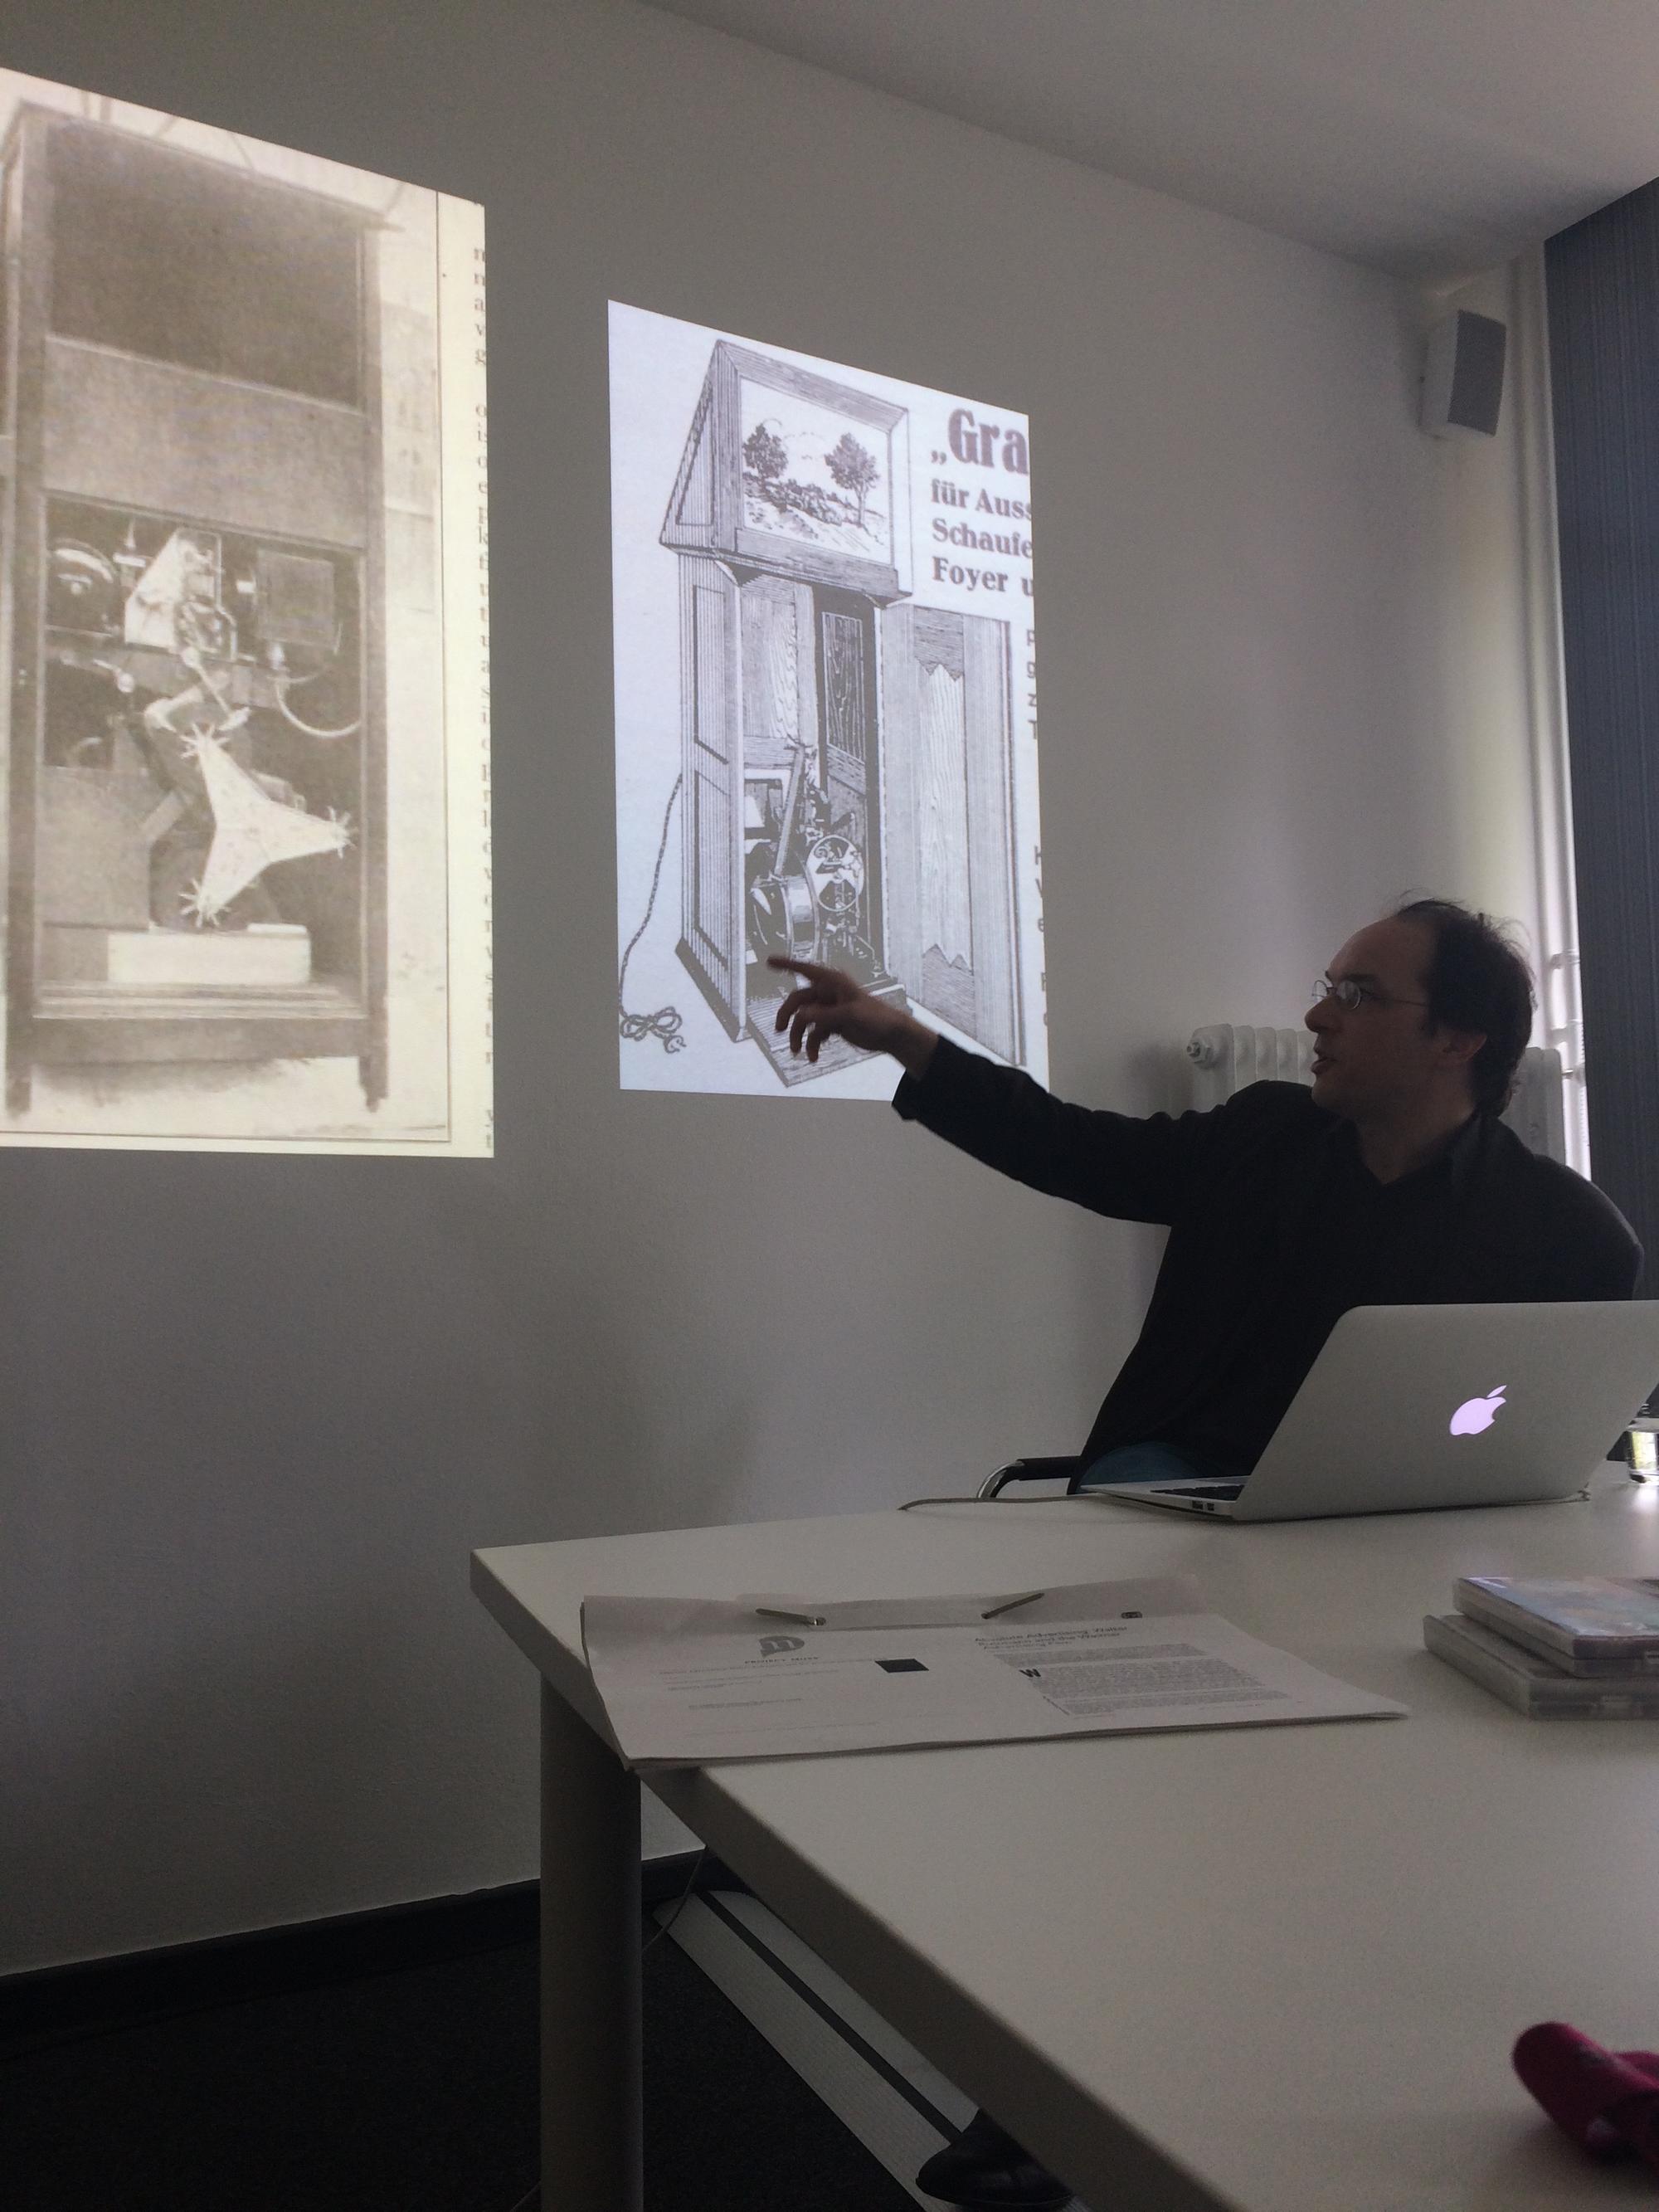 Michael Cowan explains early-20th-century projection technology